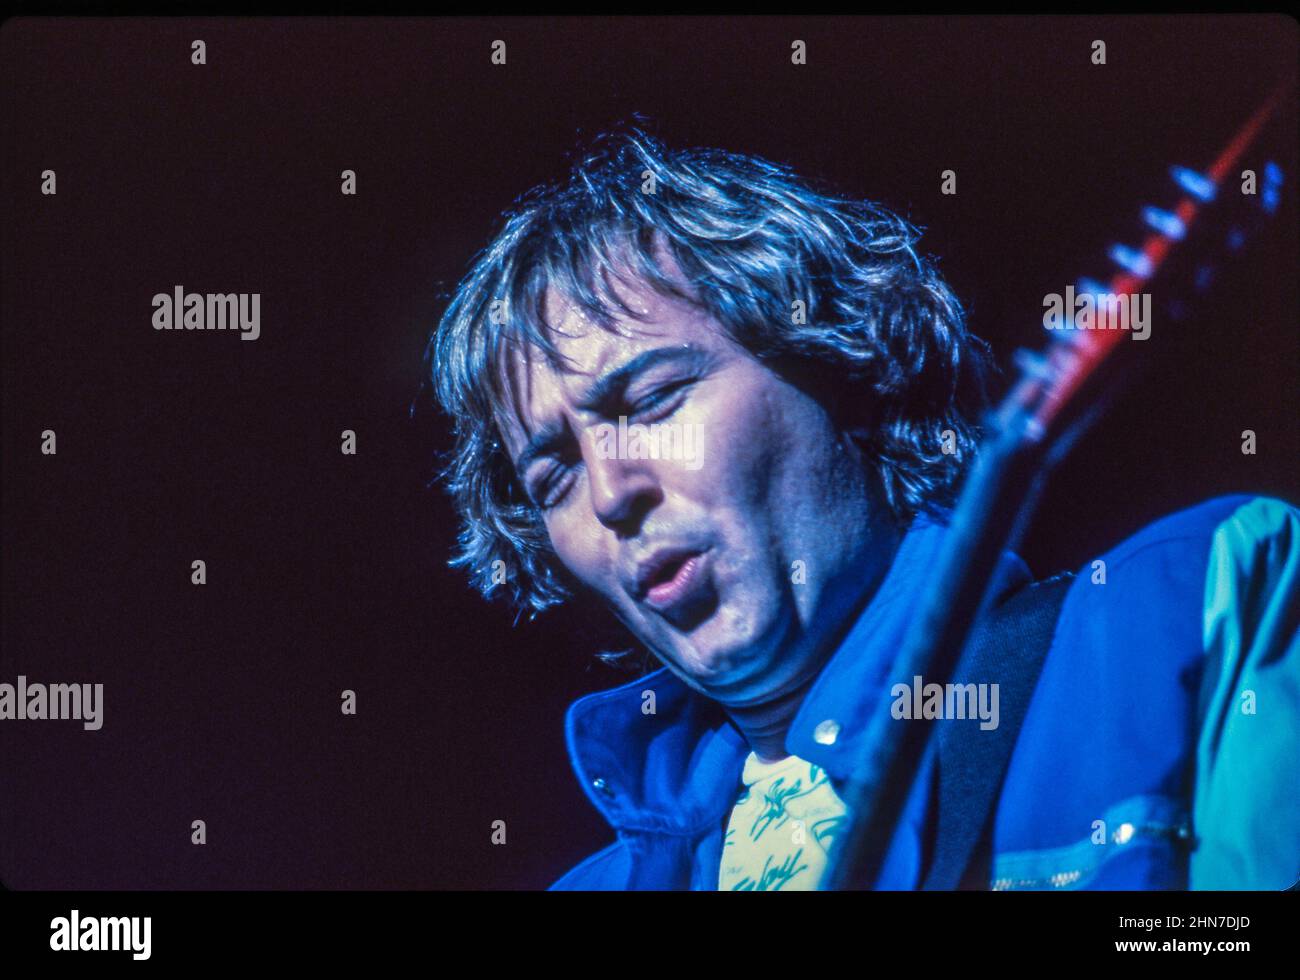 Guitarist Mick Jones of Anglo-American band Foreigner performing at Wembley Arena, London in 1985. Stock Photo